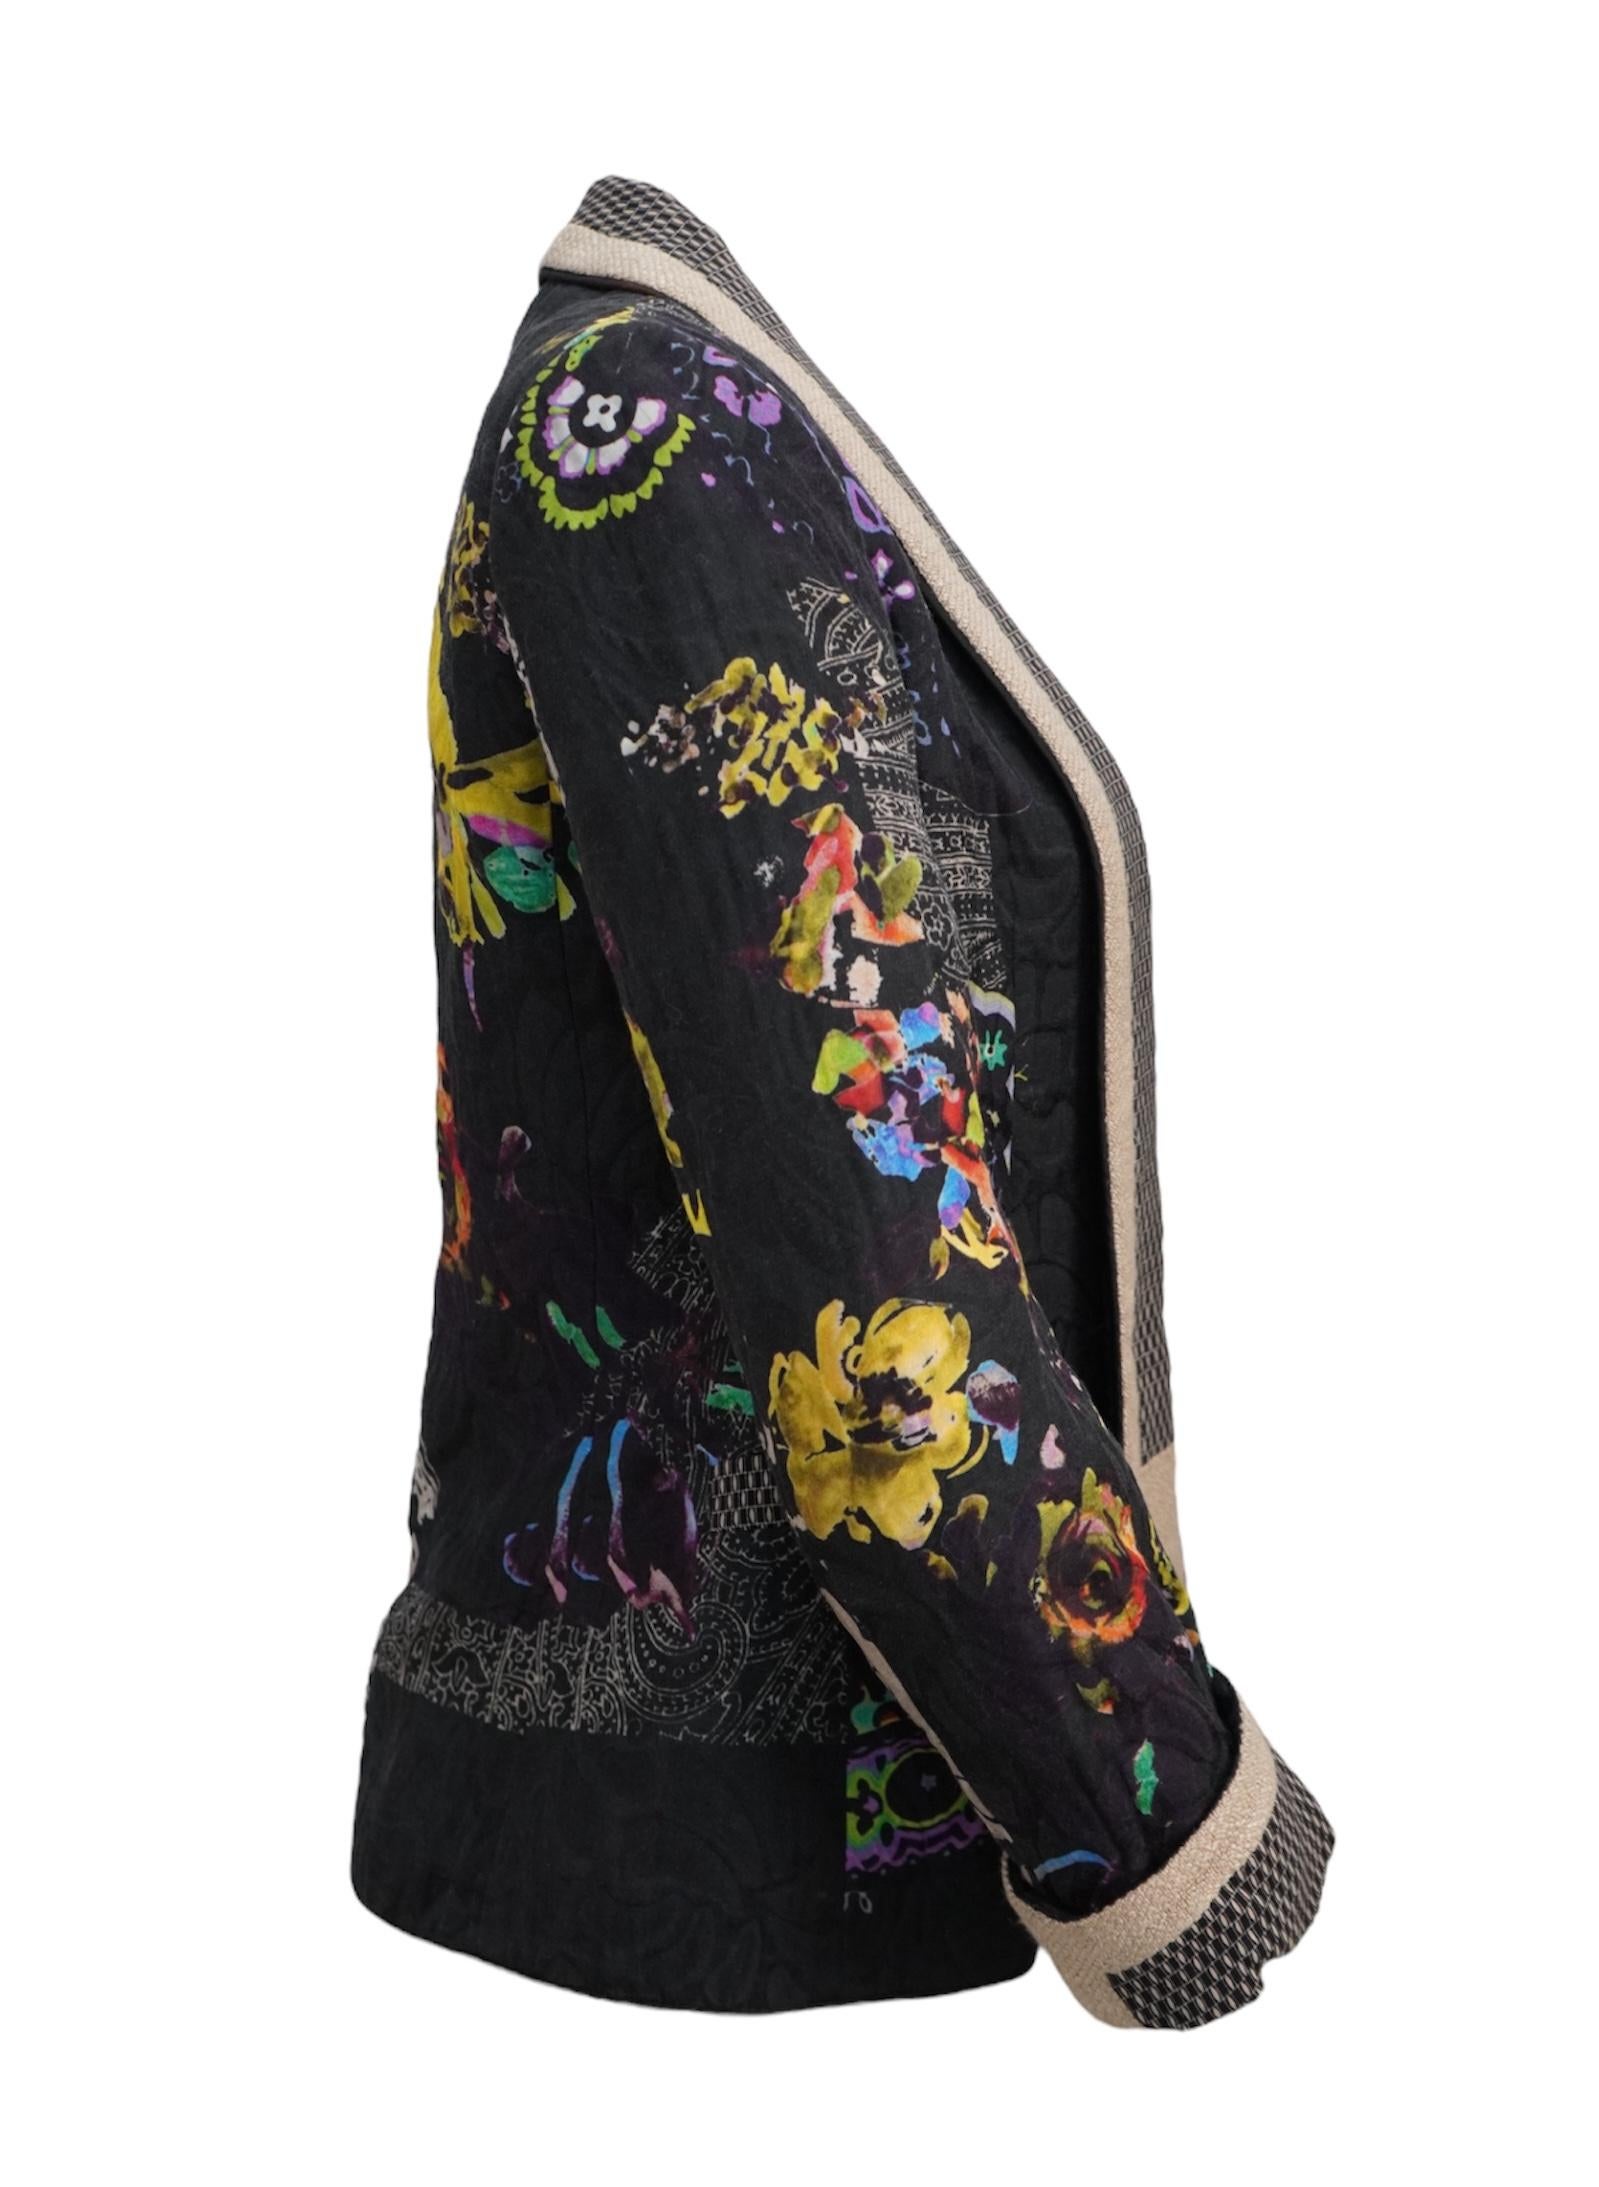 Beautifully made in Italy, this size 40 Etro Blazer is filed with details. A mix of floral and paisley, in a mix of color. With the base color blazer in the color black, and total length: 25”. Detailed trim along the collar, sleeves, and faux